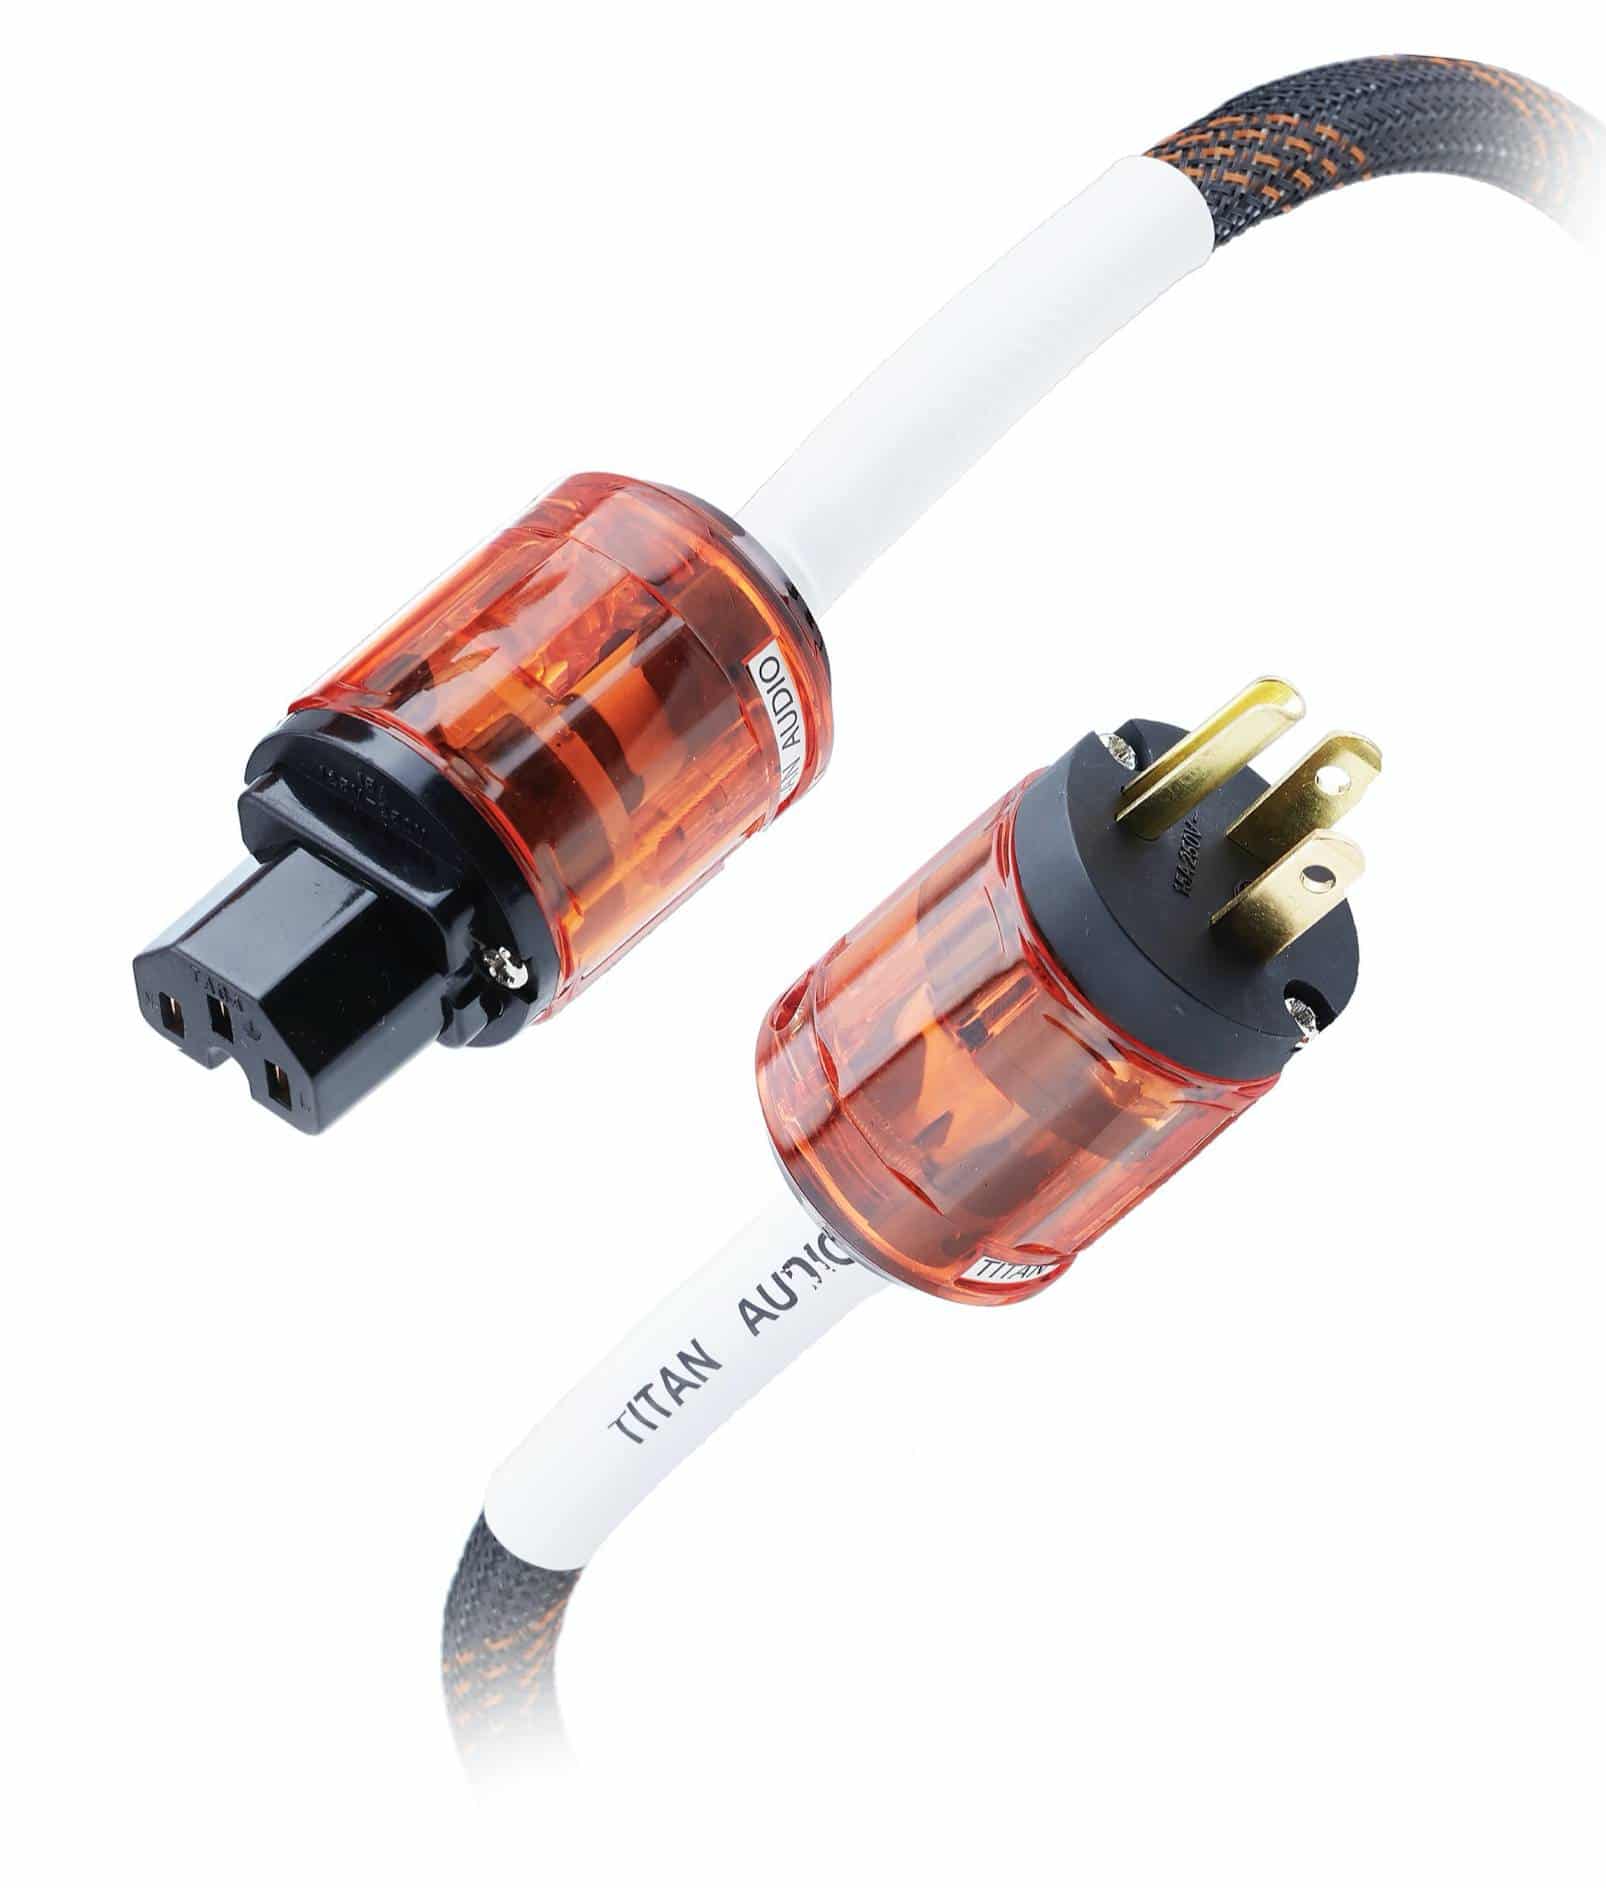 Nyx Mains Cable From Titan Audio